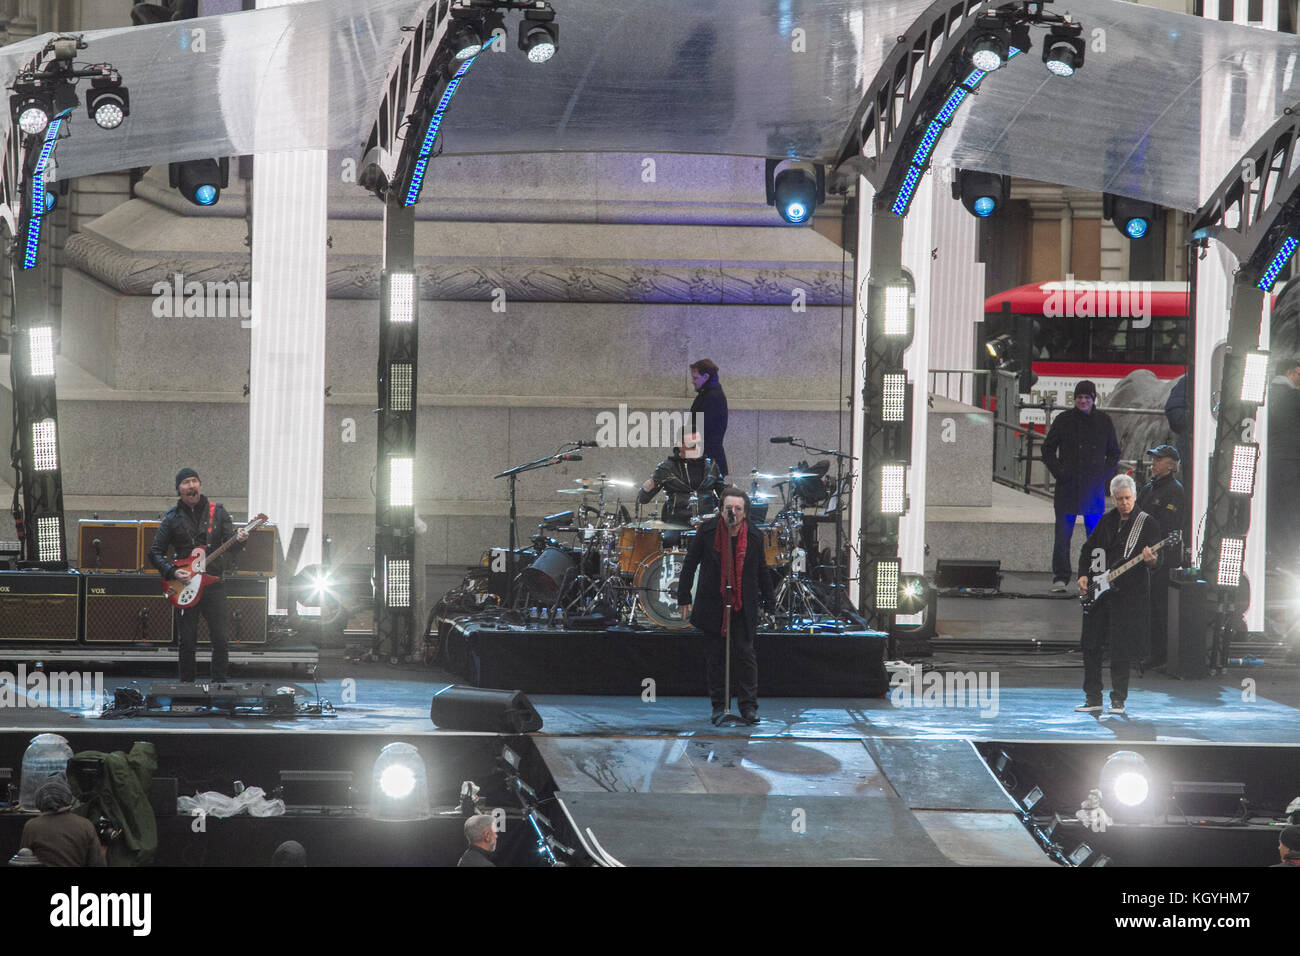 London, UK. 11th Nov, 2017. Members of the Irish Rock band U2 band rehearse on stage in Trafalgar Square London for their upcoming concert Credit: amer ghazzal/Alamy Live News Stock Photo